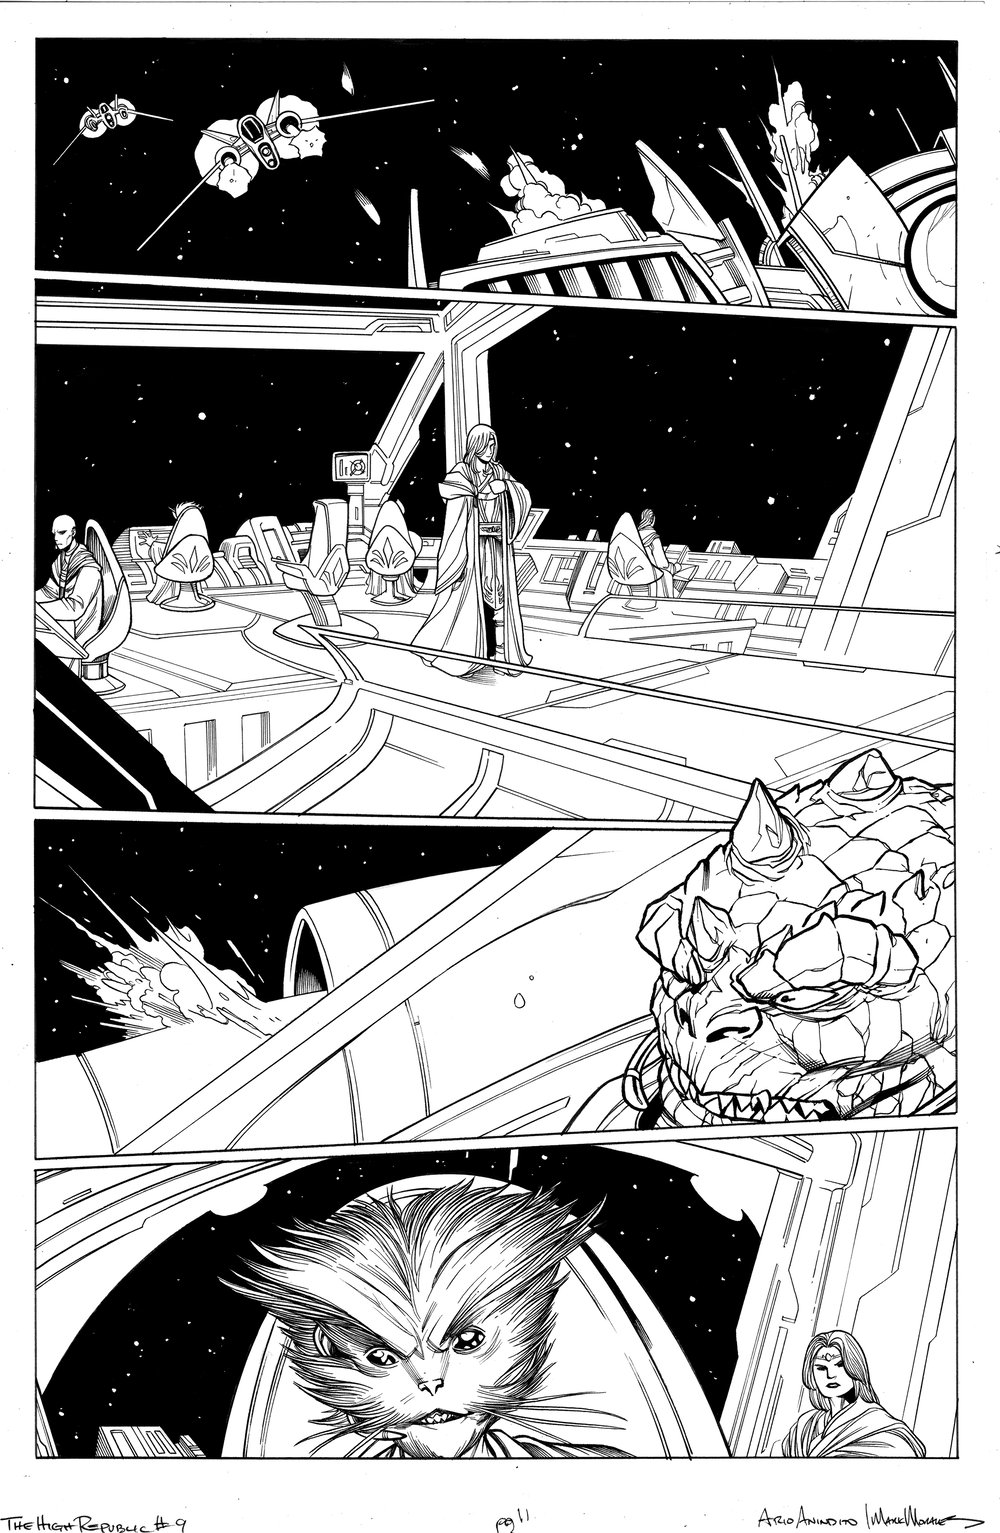 Image of Star Wars: The High Republic #9 PG 11